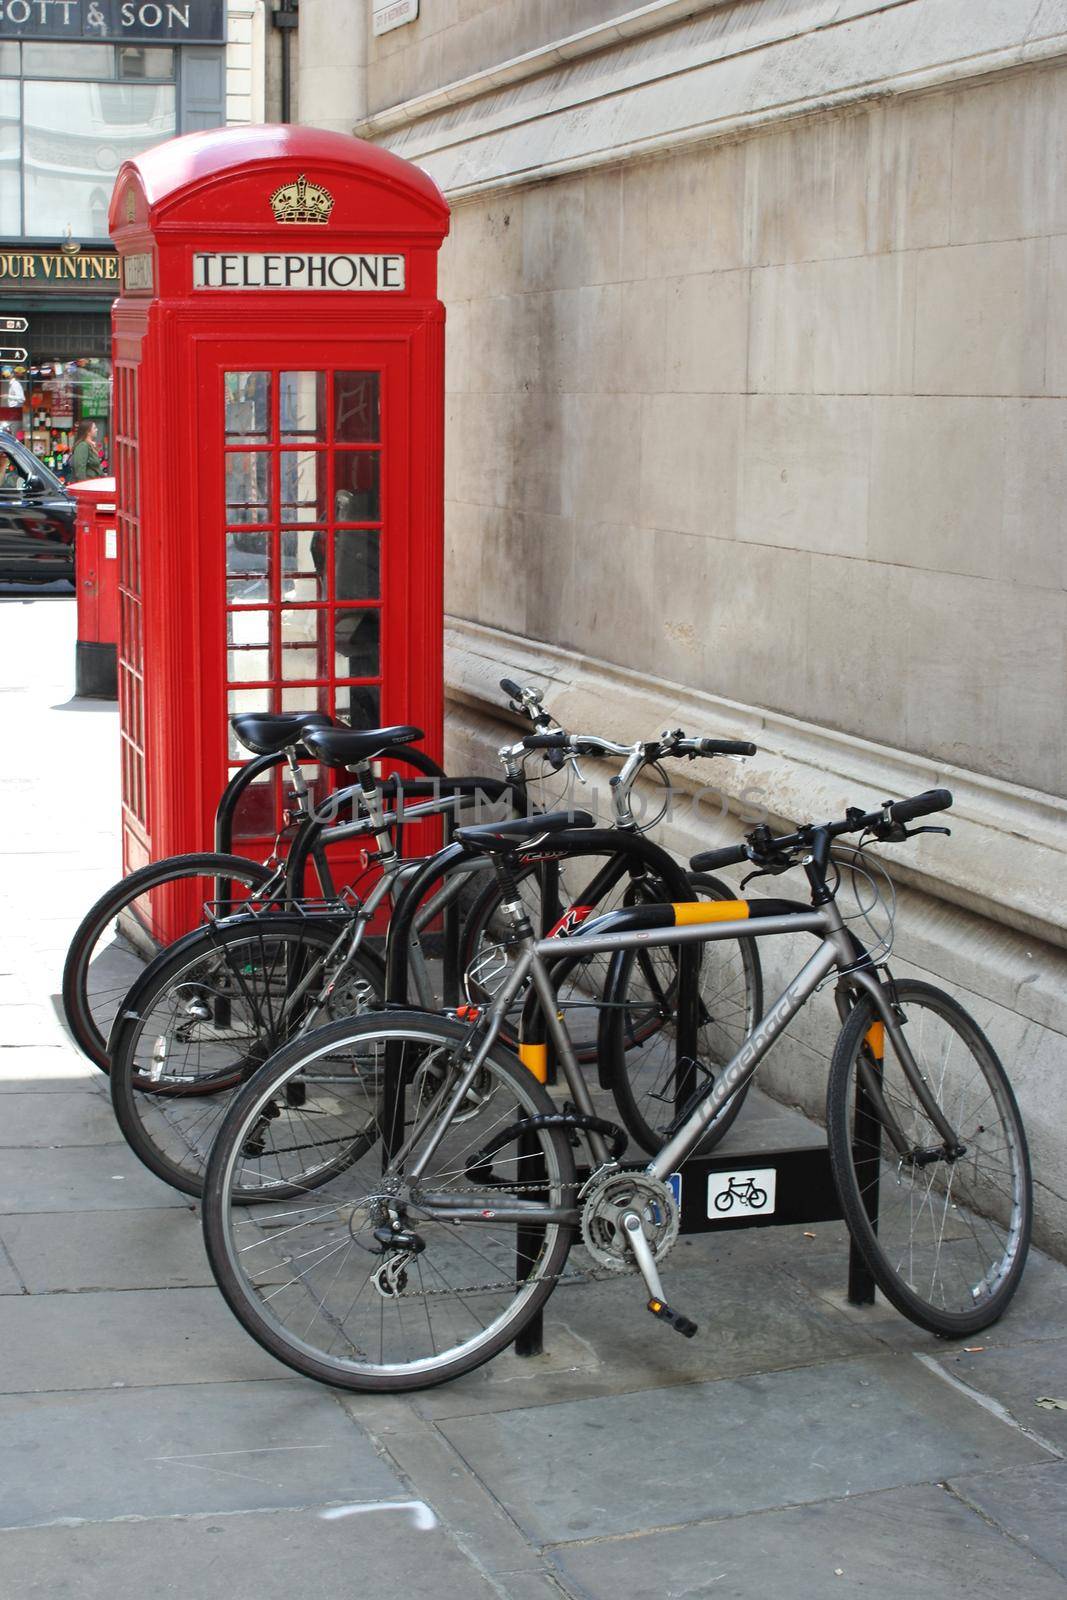 Bicycles and a red london telephone box and post box